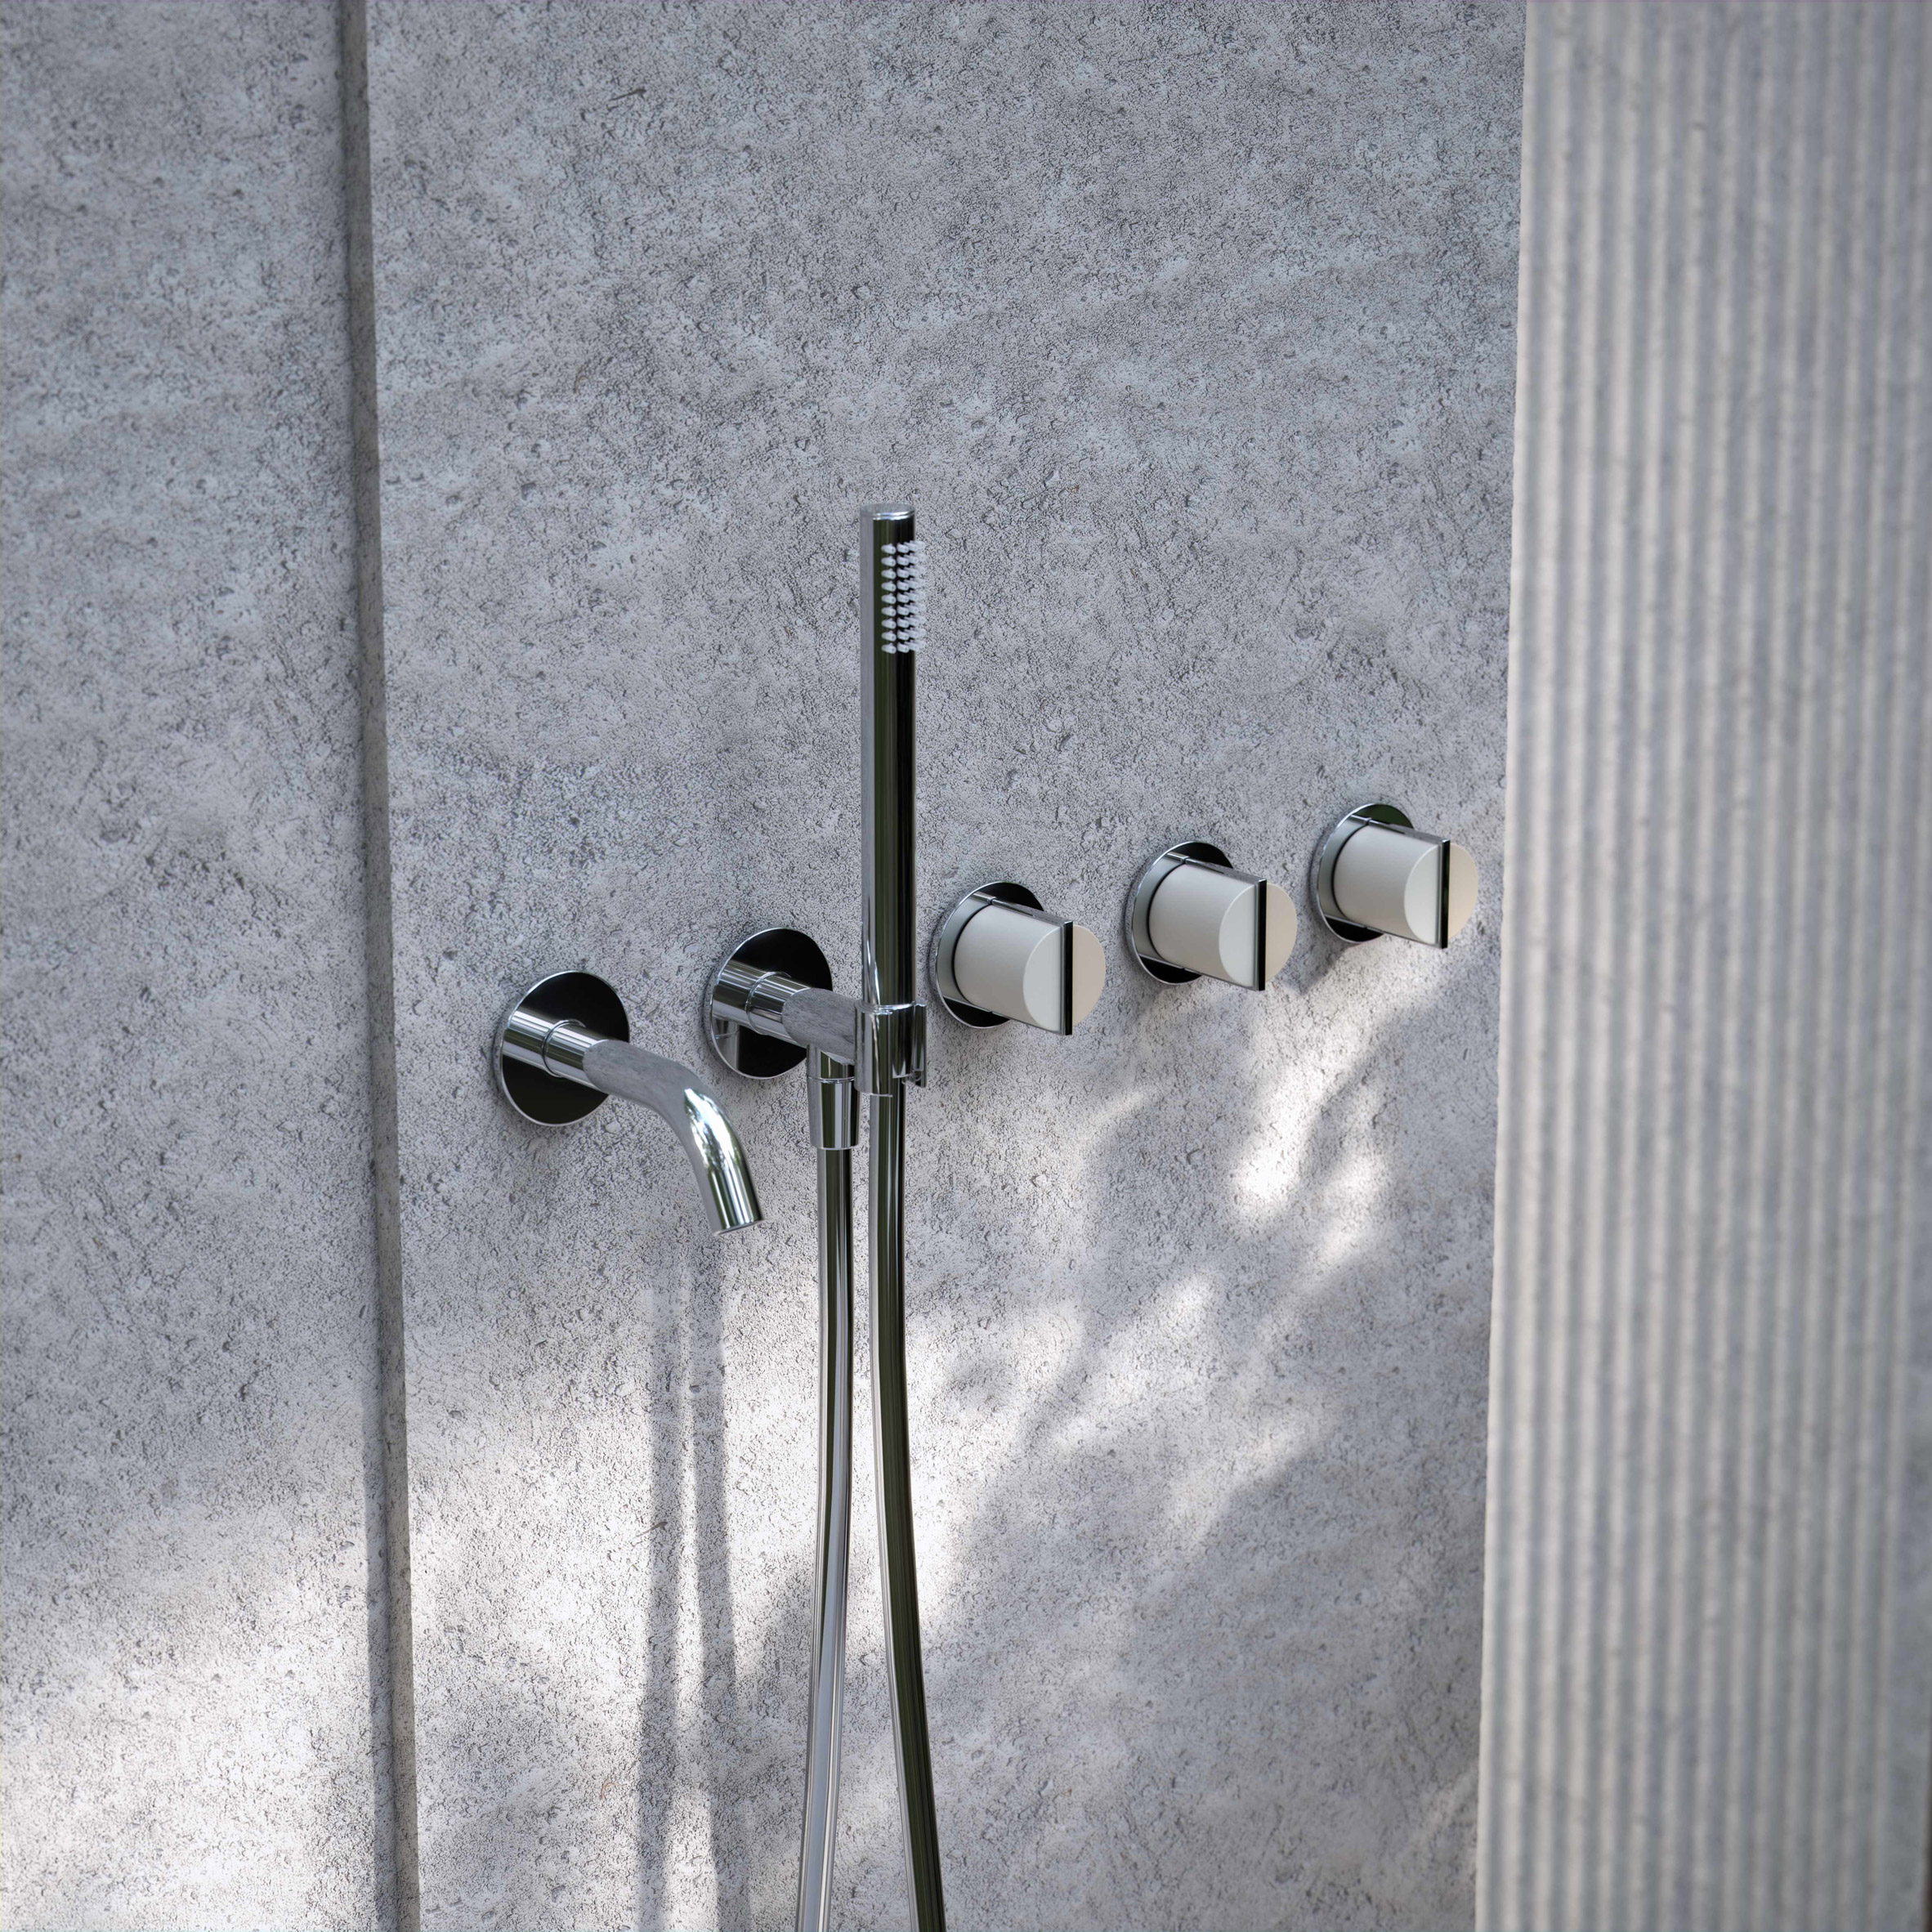 Wall-mounted metallic shower tap, shower head and handles